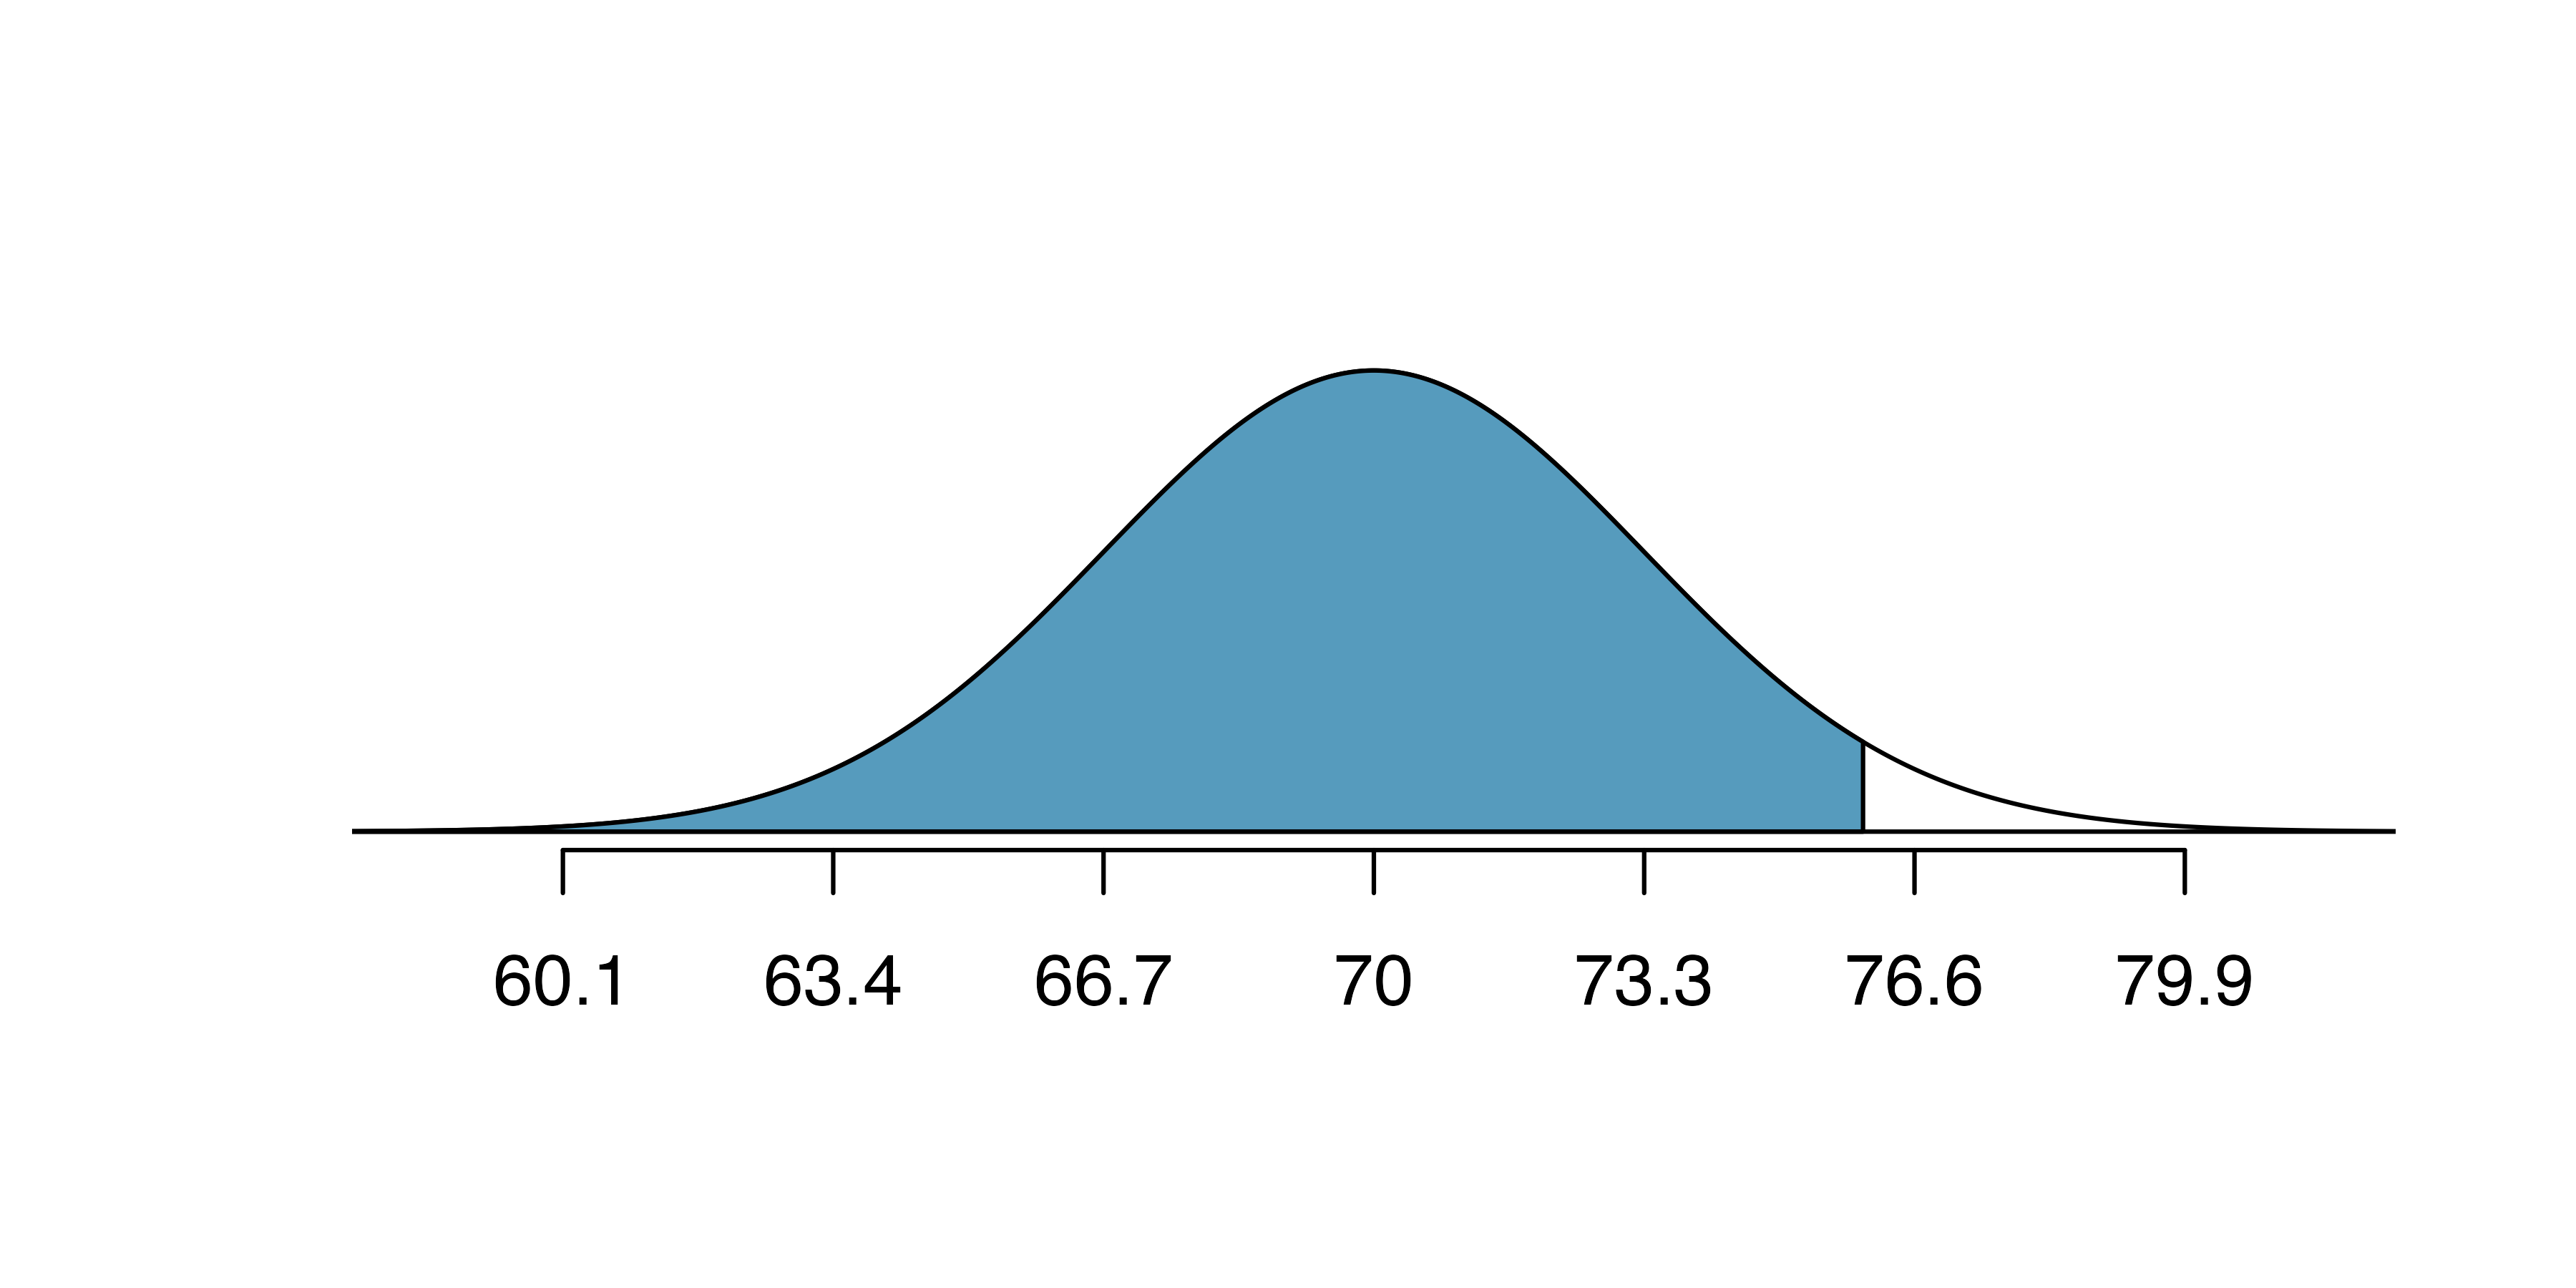 Two normal curves representing the distribution of heights. The first curve shows Kamron's height, shading below 67 inches, and the second curve shows Adrian's height, shading below 70 inches. 